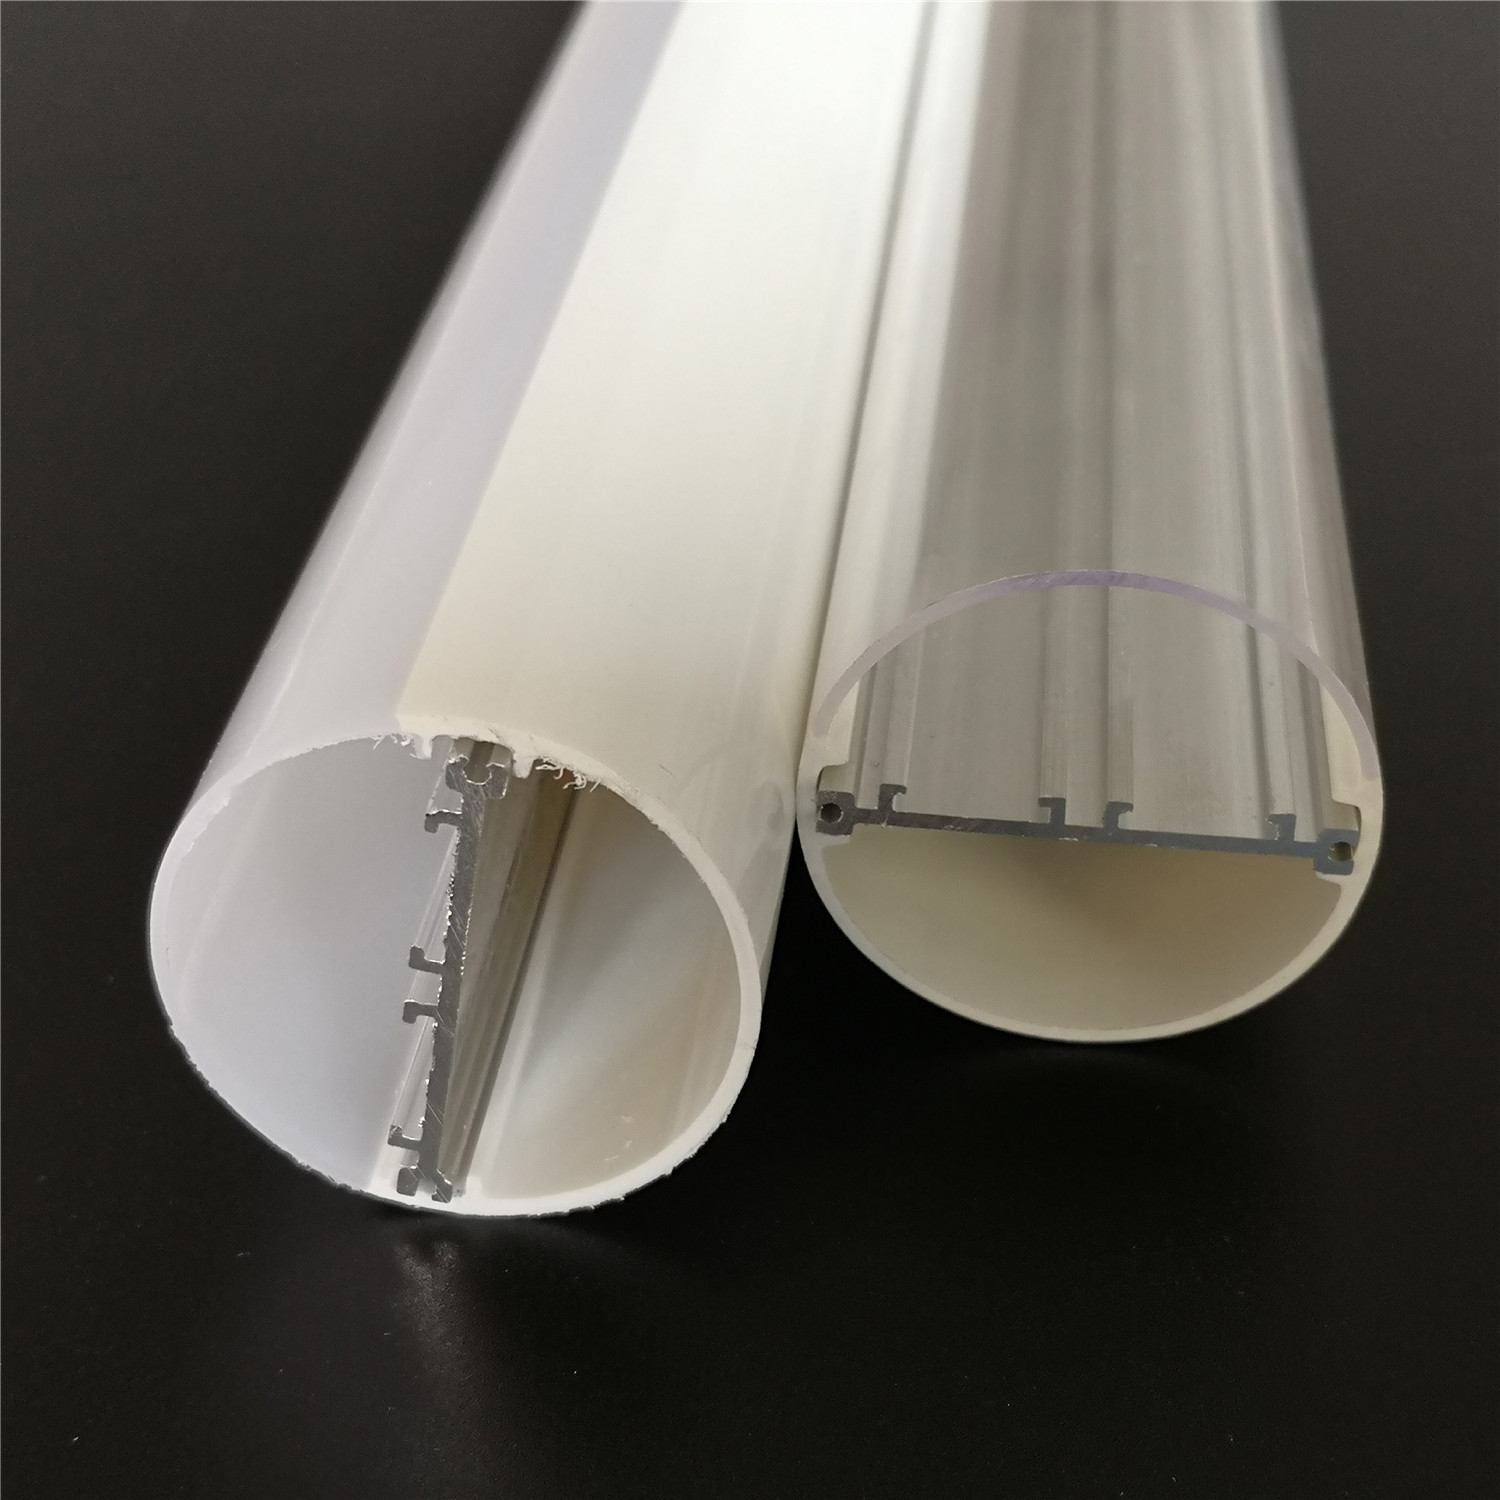 New arrival--LED T12 tube housing rotated 180 degrees